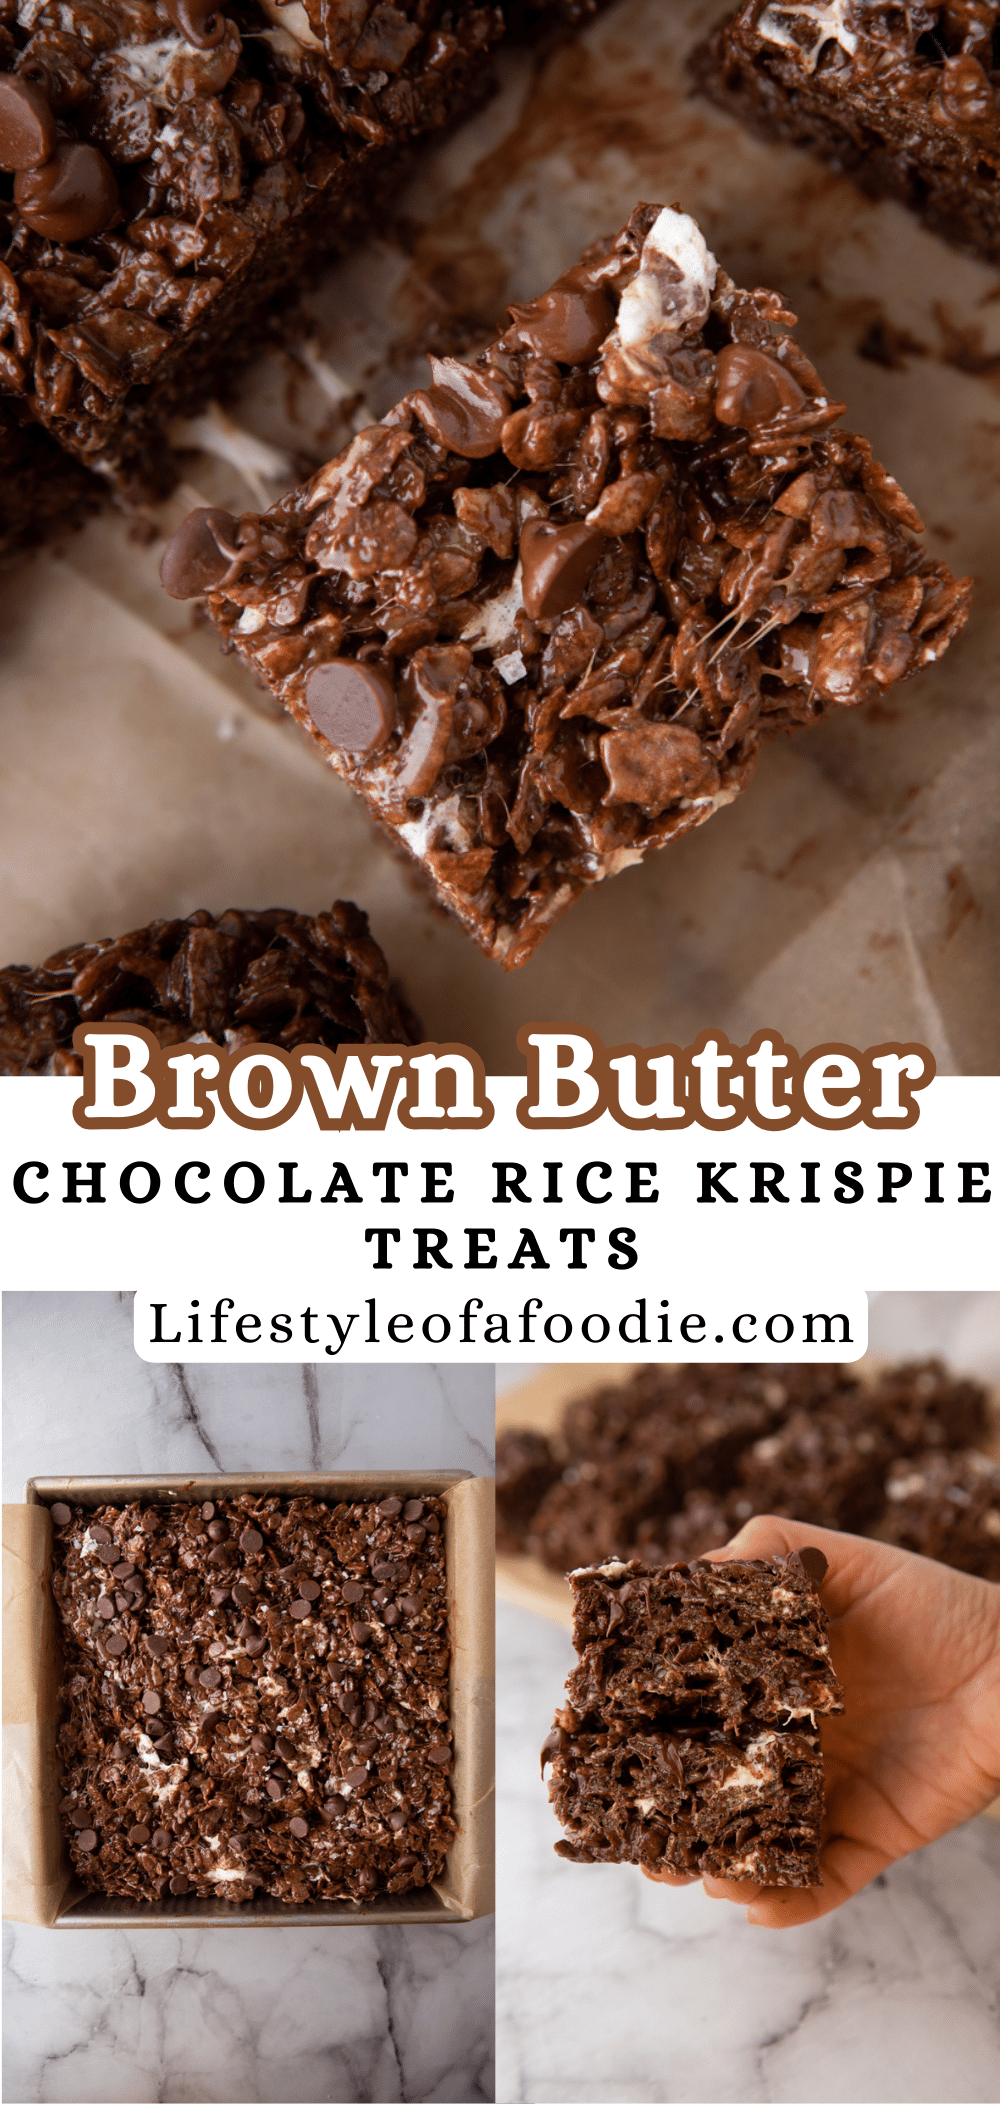 The Best Chocolate Rice Krispies Treats Recipe - Lifestyle of a Foodie